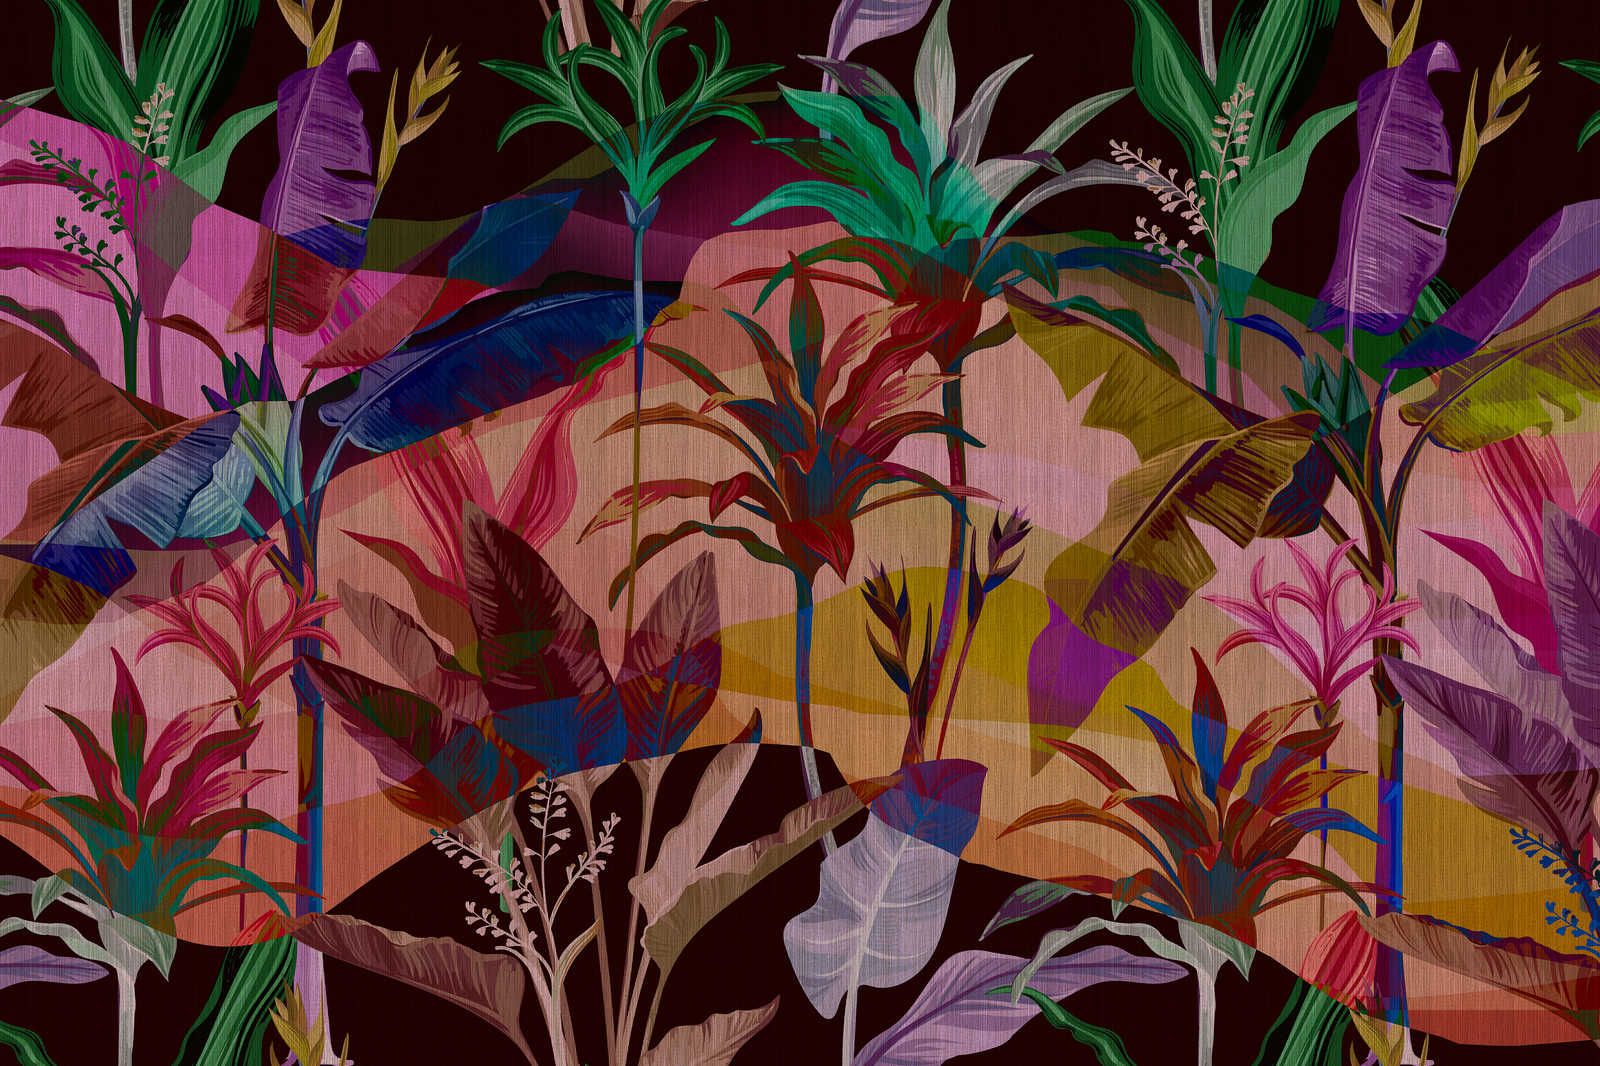             Palmyra 1 - Jungle canvas picture colourful & abstract leaves - 0,90 m x 0,60 m
        